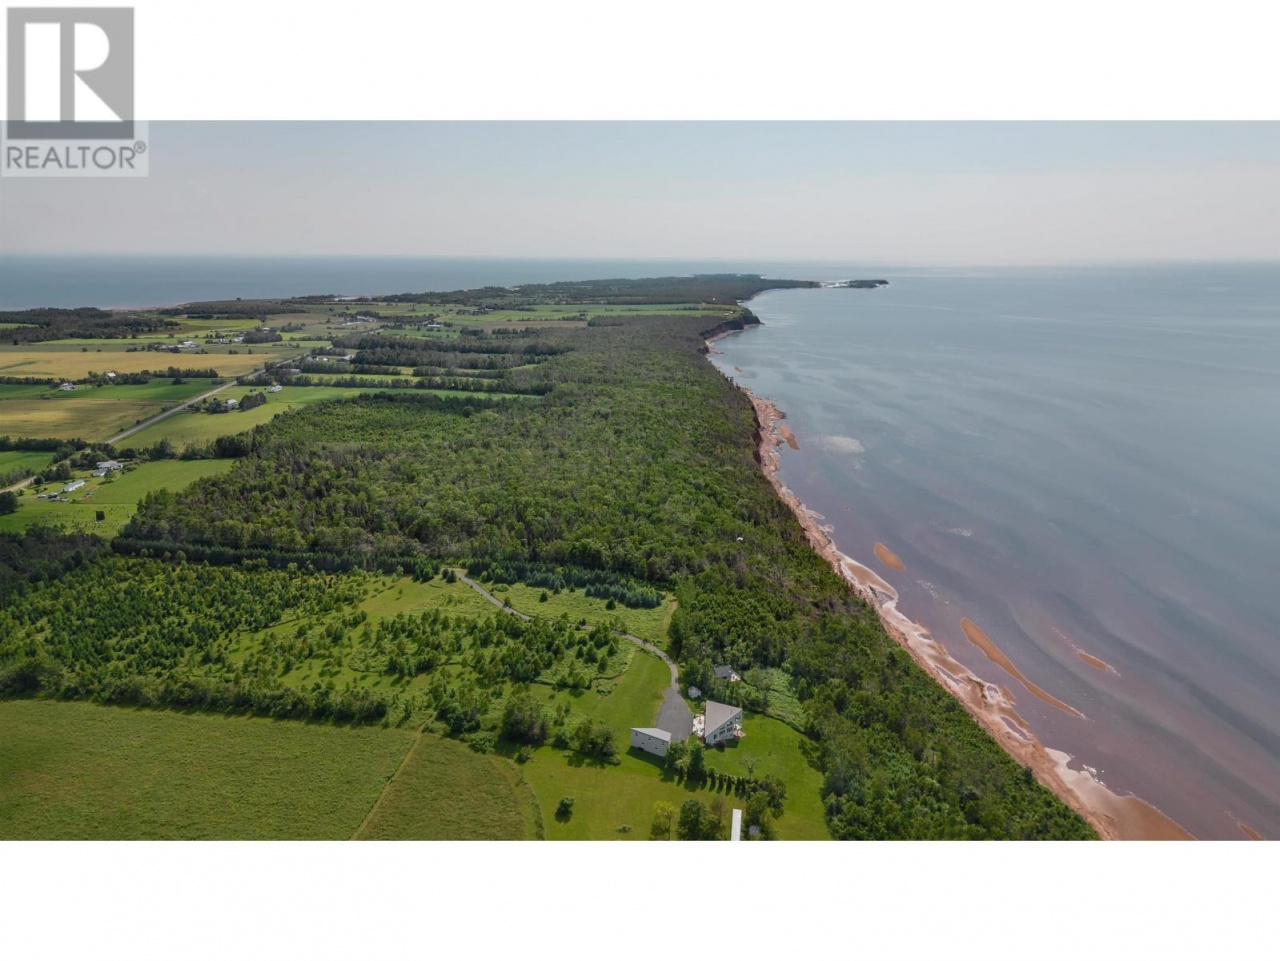 520 Point Prim Road520 Point Prim Road, Point Prim, Prince Edward Island C0A1A0, 3 Bedrooms Bedrooms, ,4 BathroomsBathrooms,Single Family,For Sale,520 Point Prim Road,202313199